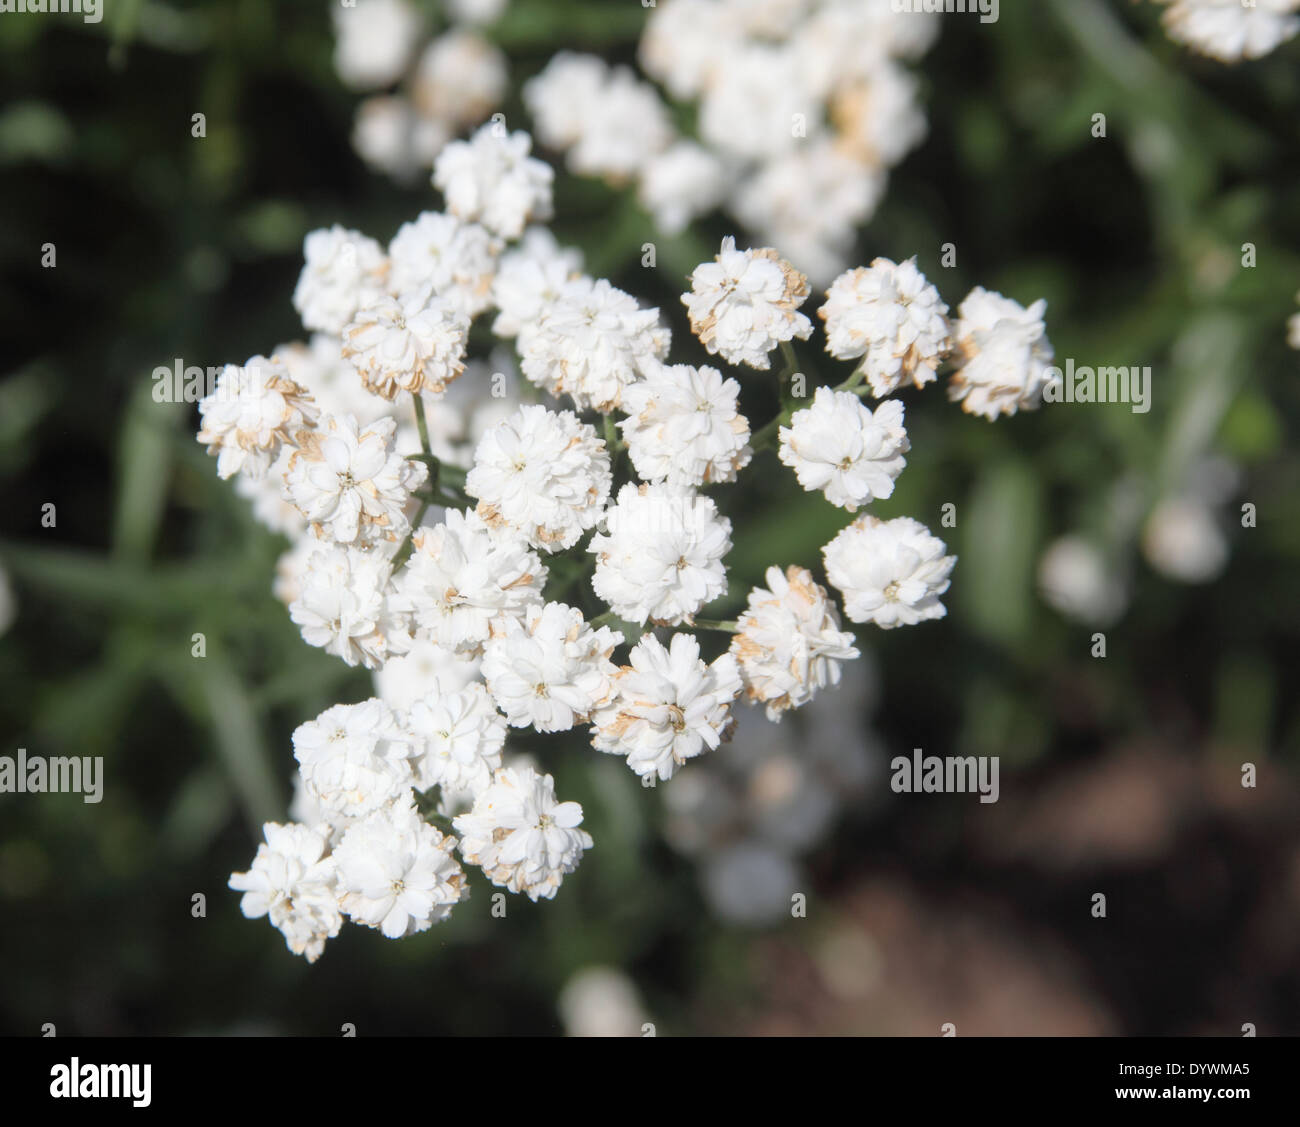 Achillea ptarmica 'The Pearl' close up of flowers Stock Photo